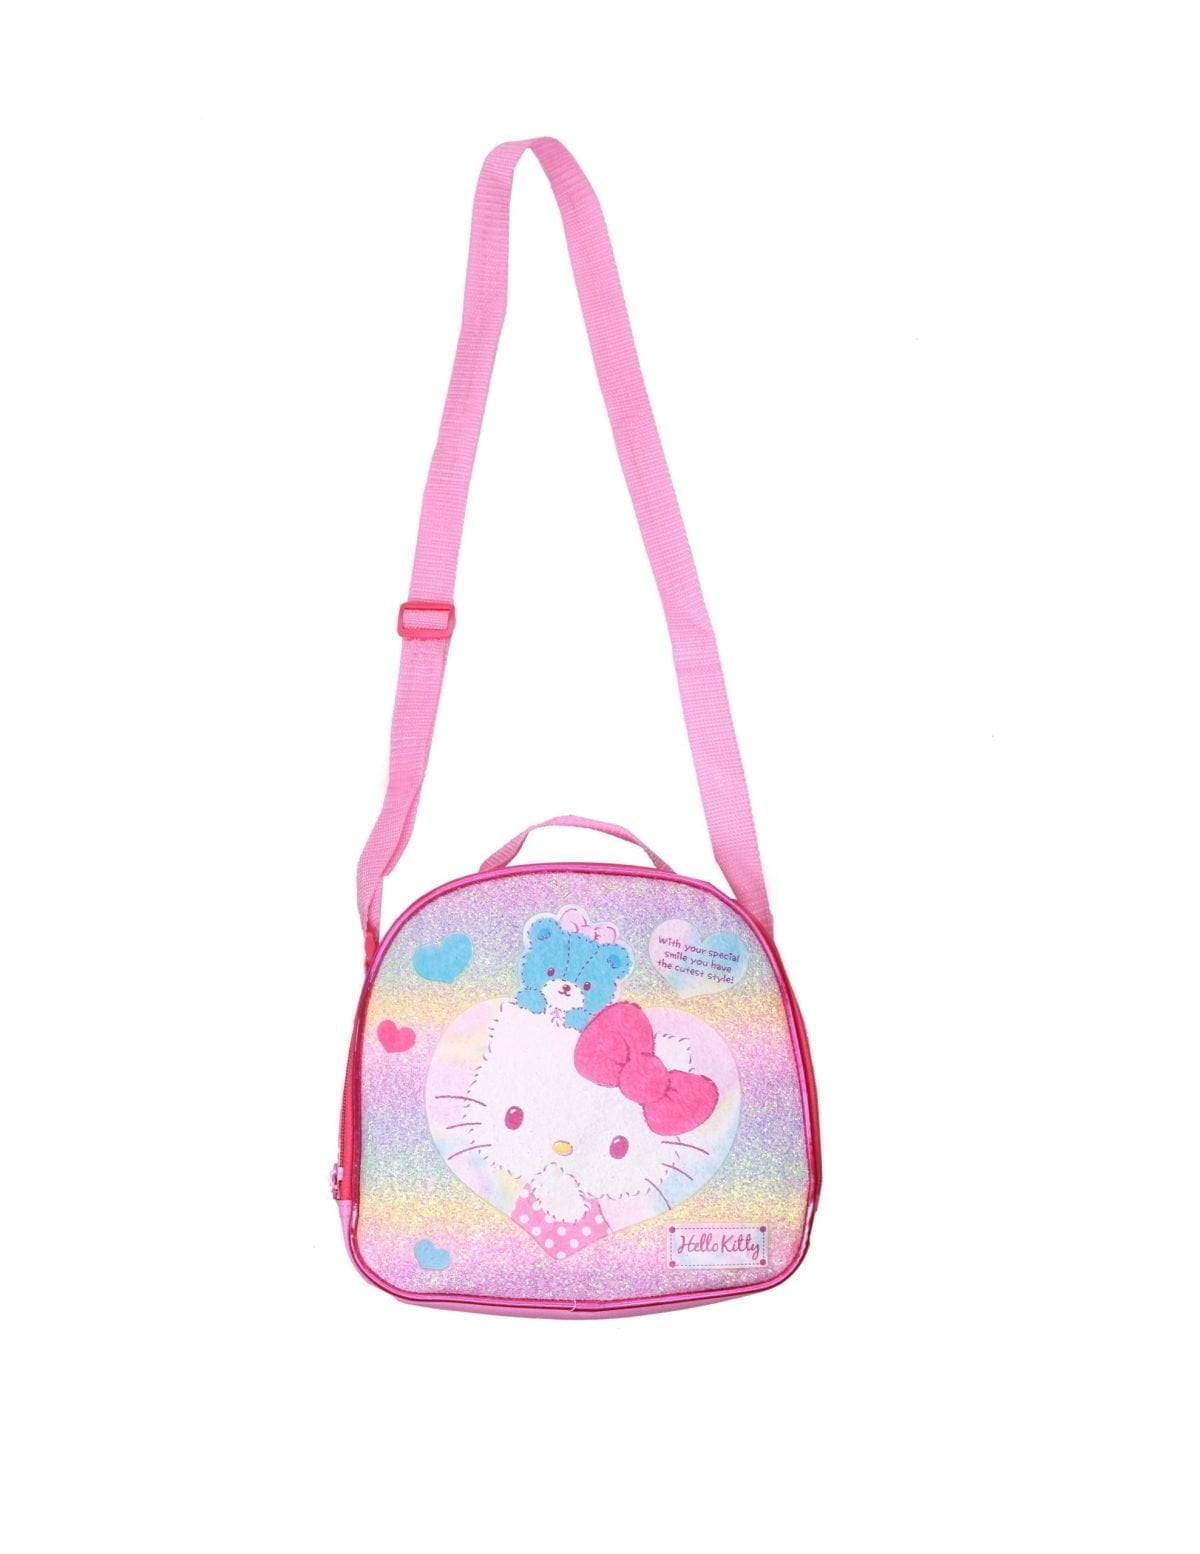 Hk671 230 1 Scaled Hello Kitty Make Your Kids  Lunch More Fun By Using This Stylish Lunch Bag. This Spacious Bag Can Fit Most Standard Sized Lunch Boxes. Add More Flavor And Become The Center Of Attraction When You Take Out This Bag. &Amp;Lt;Ul&Amp;Gt; &Amp;Lt;Li&Amp;Gt;Stylish Lunch Bag&Amp;Lt;/Li&Amp;Gt; &Amp;Lt;Li&Amp;Gt;Spacious&Amp;Lt;/Li&Amp;Gt; &Amp;Lt;Li&Amp;Gt;Can Fit Most Standard Lunch Boxes&Amp;Lt;/Li&Amp;Gt; &Amp;Lt;/Ul&Amp;Gt; Hello Kitty Hello Kitty Insulated Lunch Bag (Hk671)